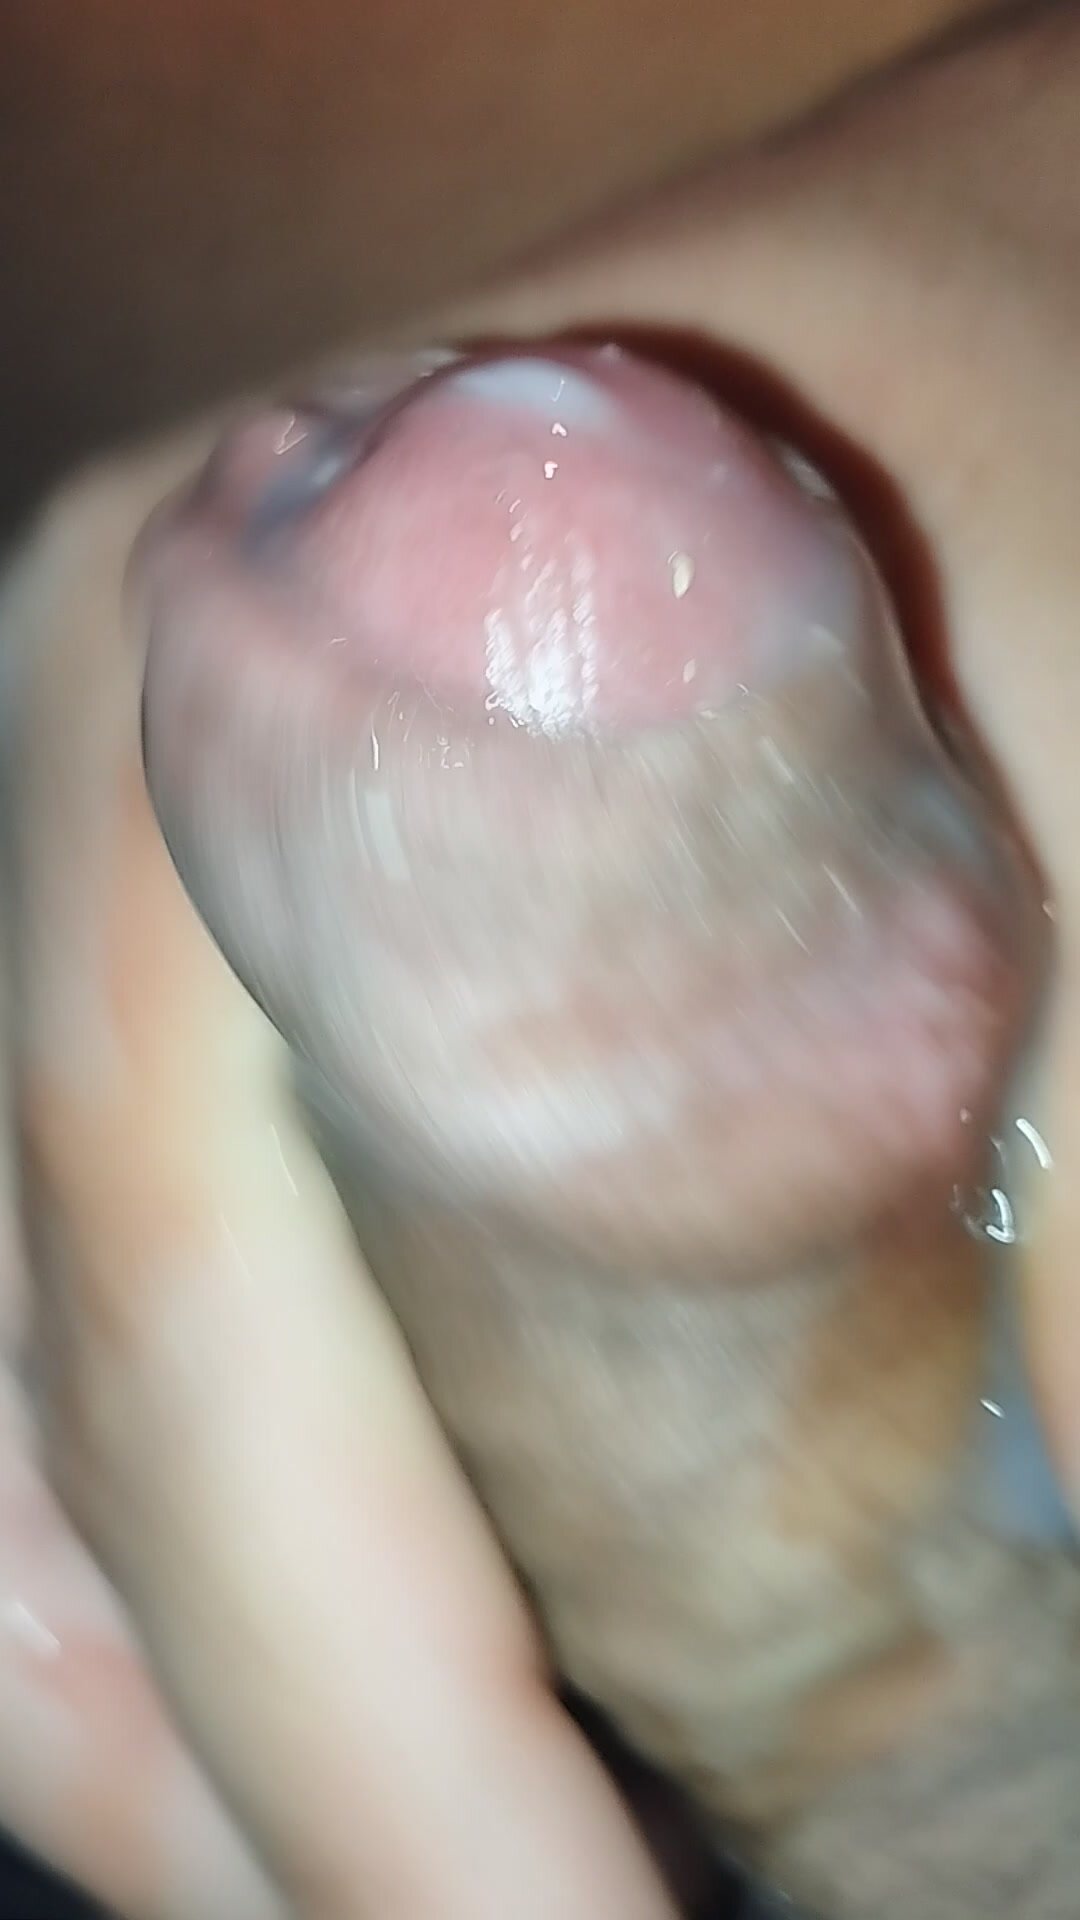 My cheesy cock with cum